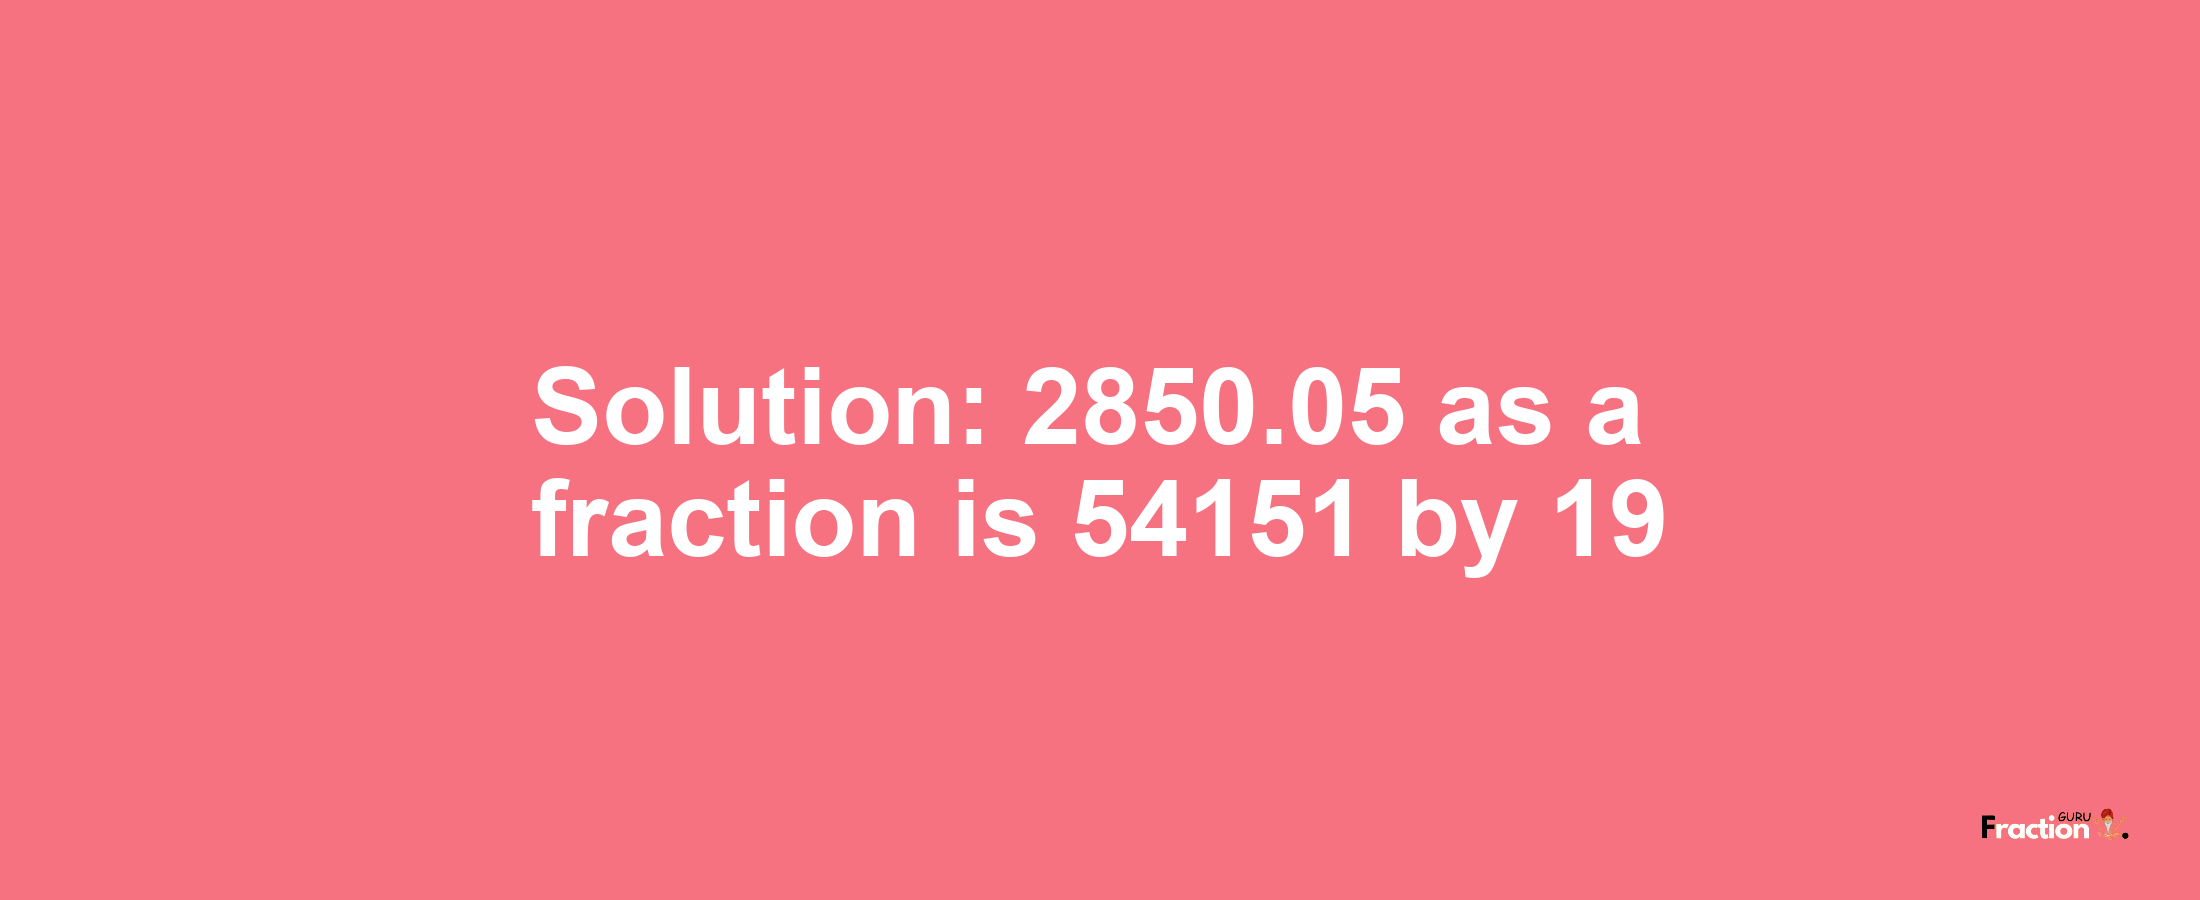 Solution:2850.05 as a fraction is 54151/19